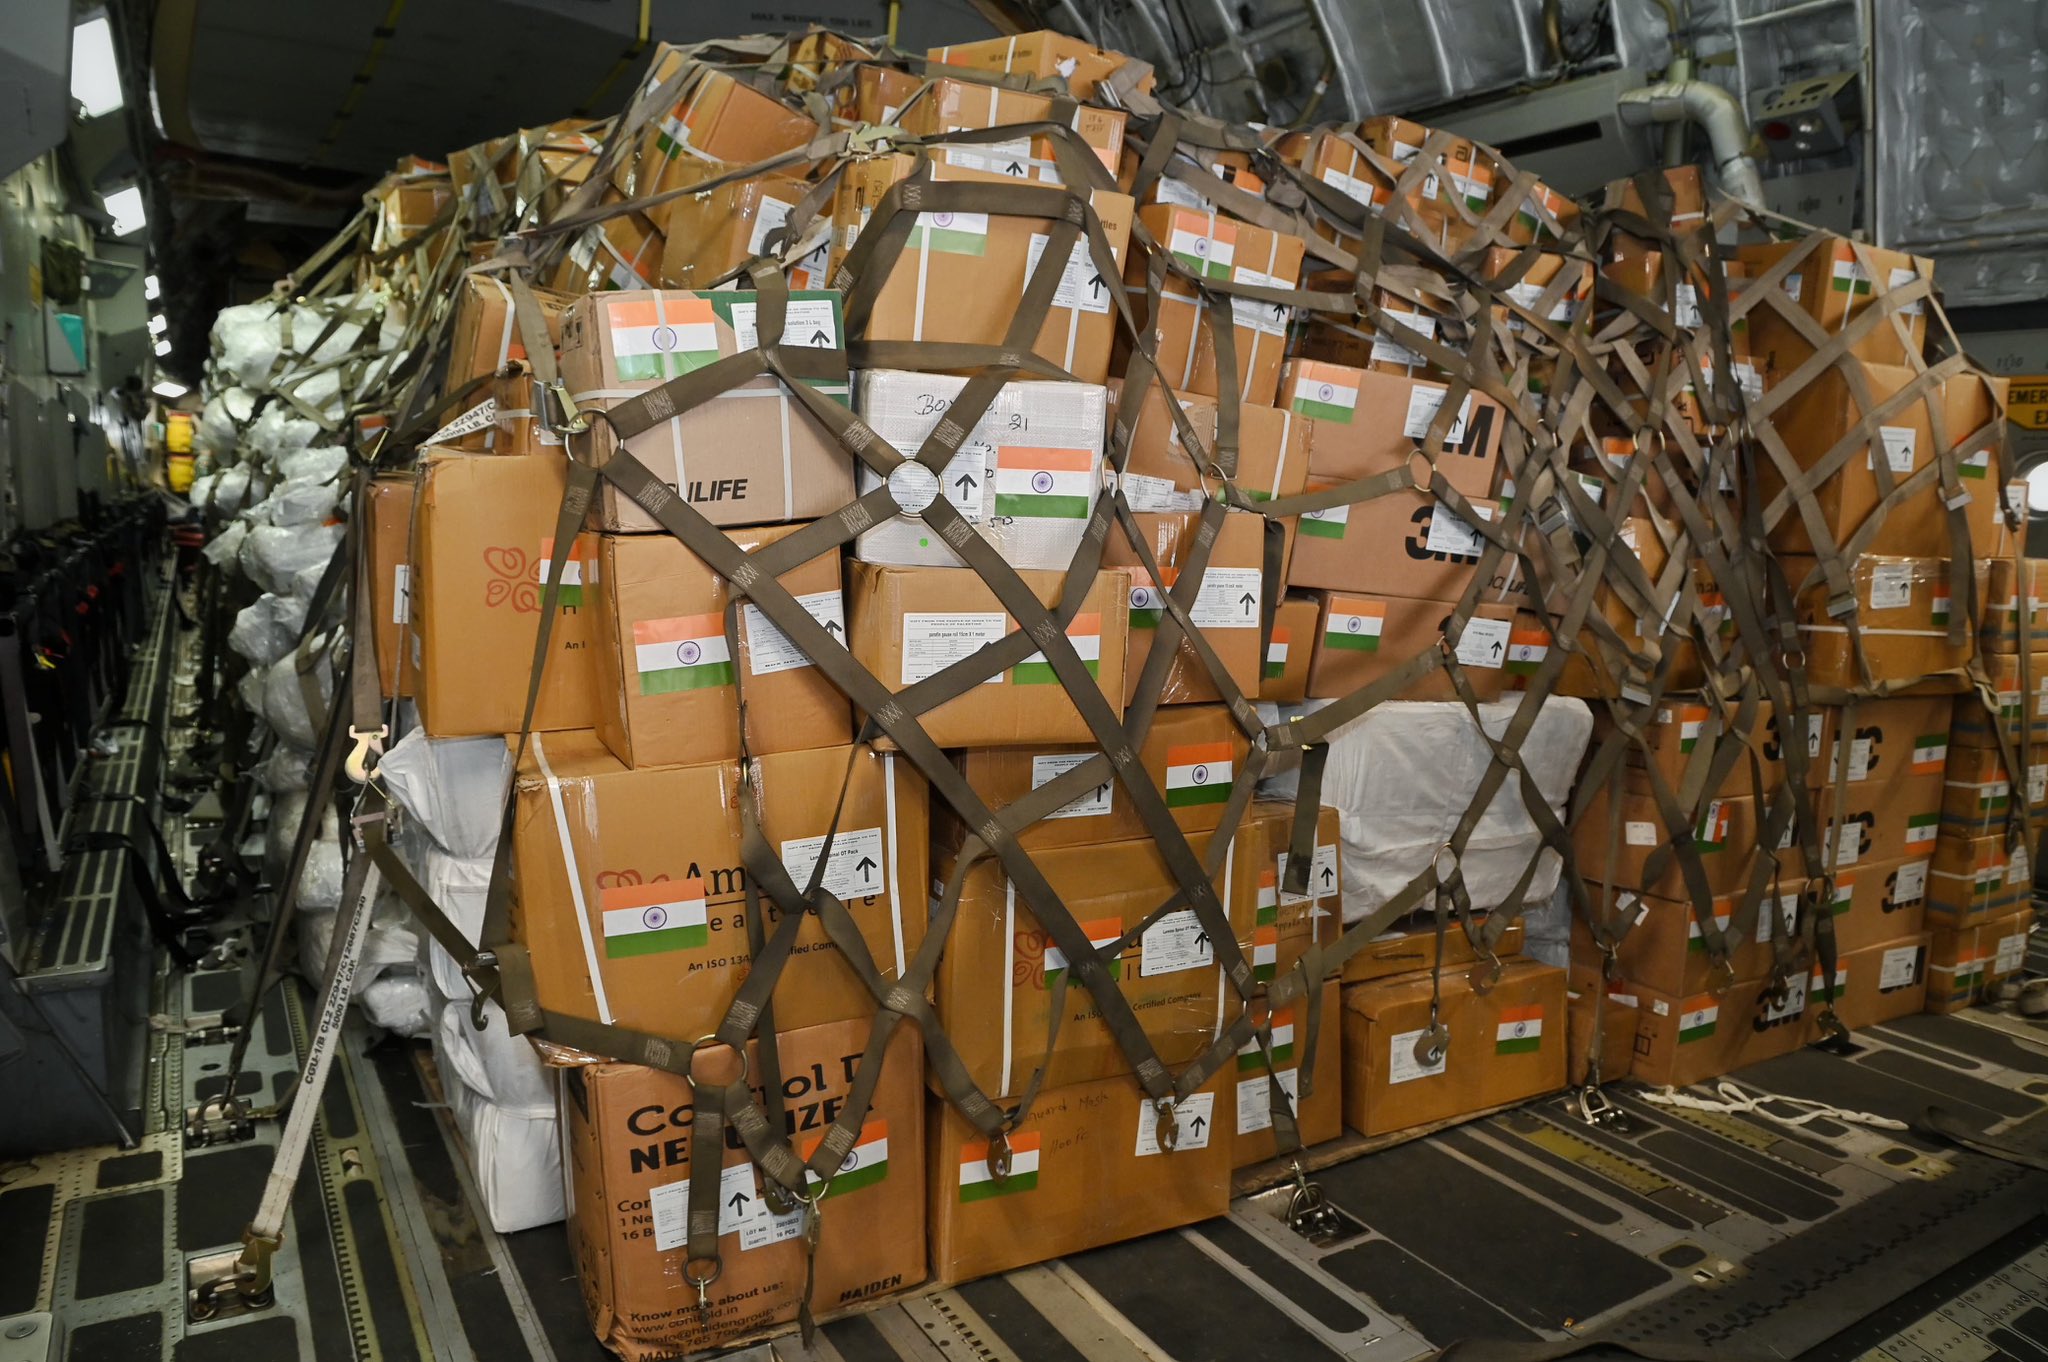 India sends humanitarian aid to Palestine after catastrophic hospital attack in Gaza killed over 500